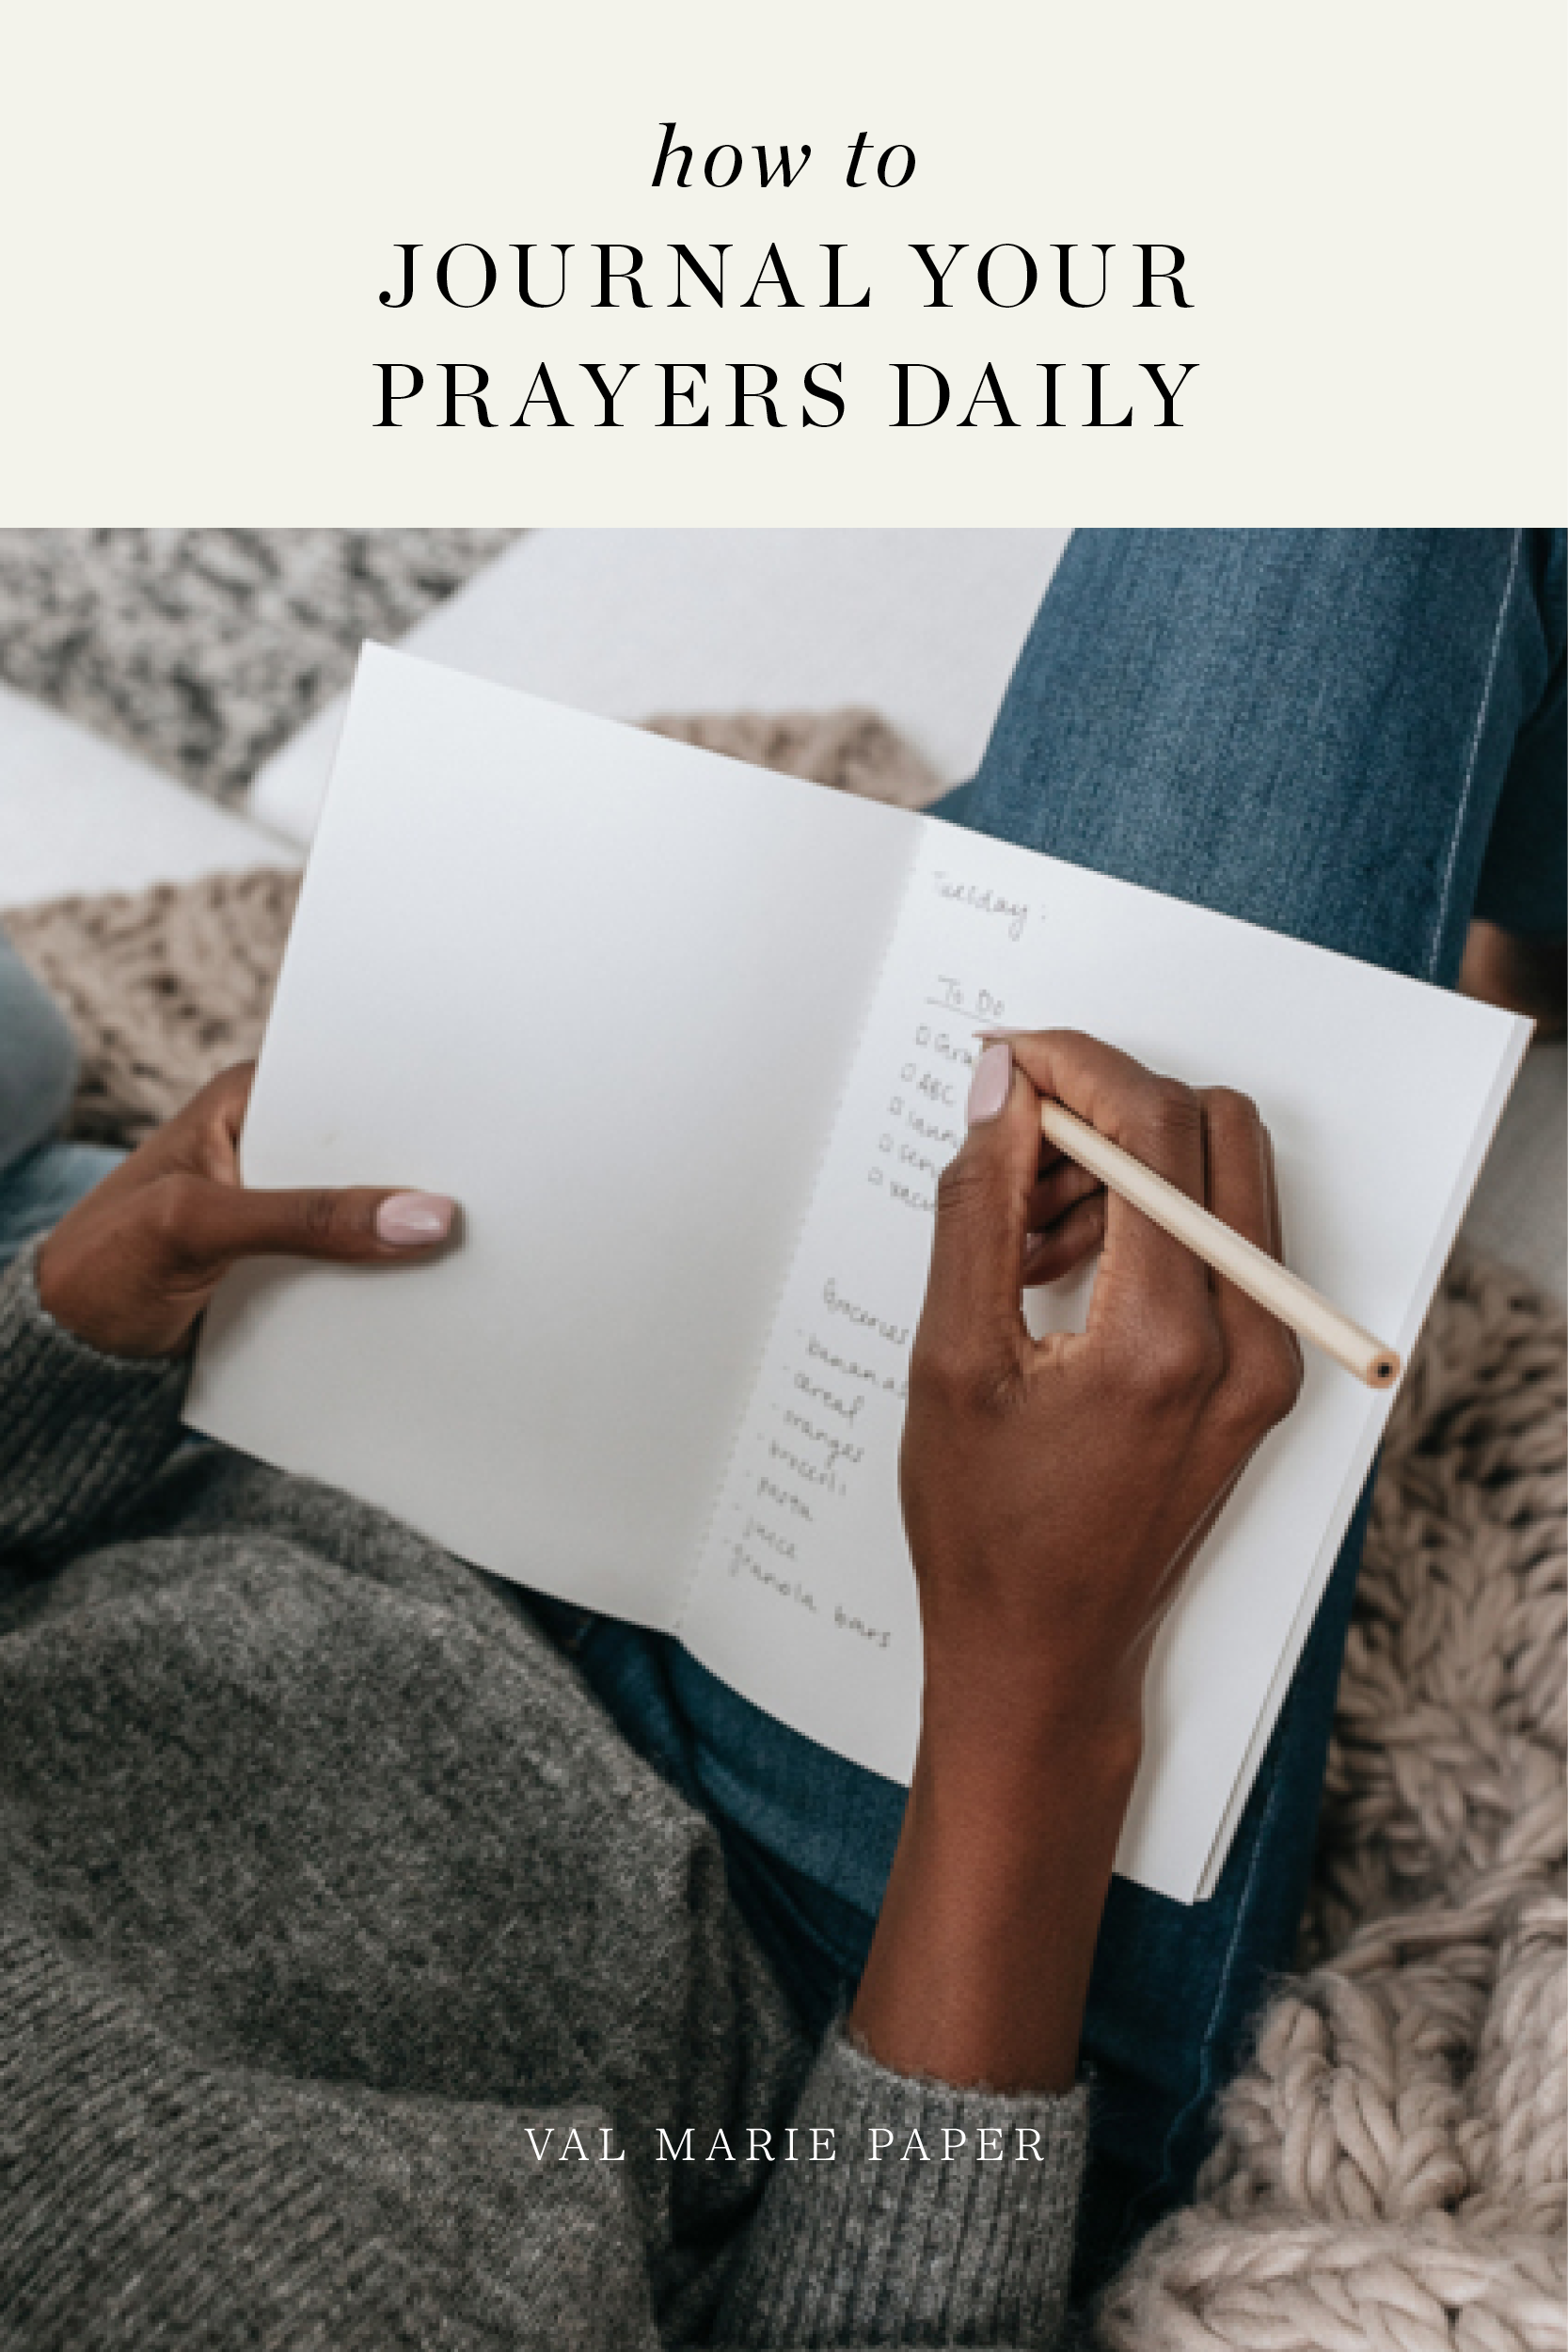 How to journal prayers daily by Valerie Woerner, ministry, prayer, refresh, praying for husband, praying for kids, prayer journal, prayer journaling, journal, journaling, prayer habit